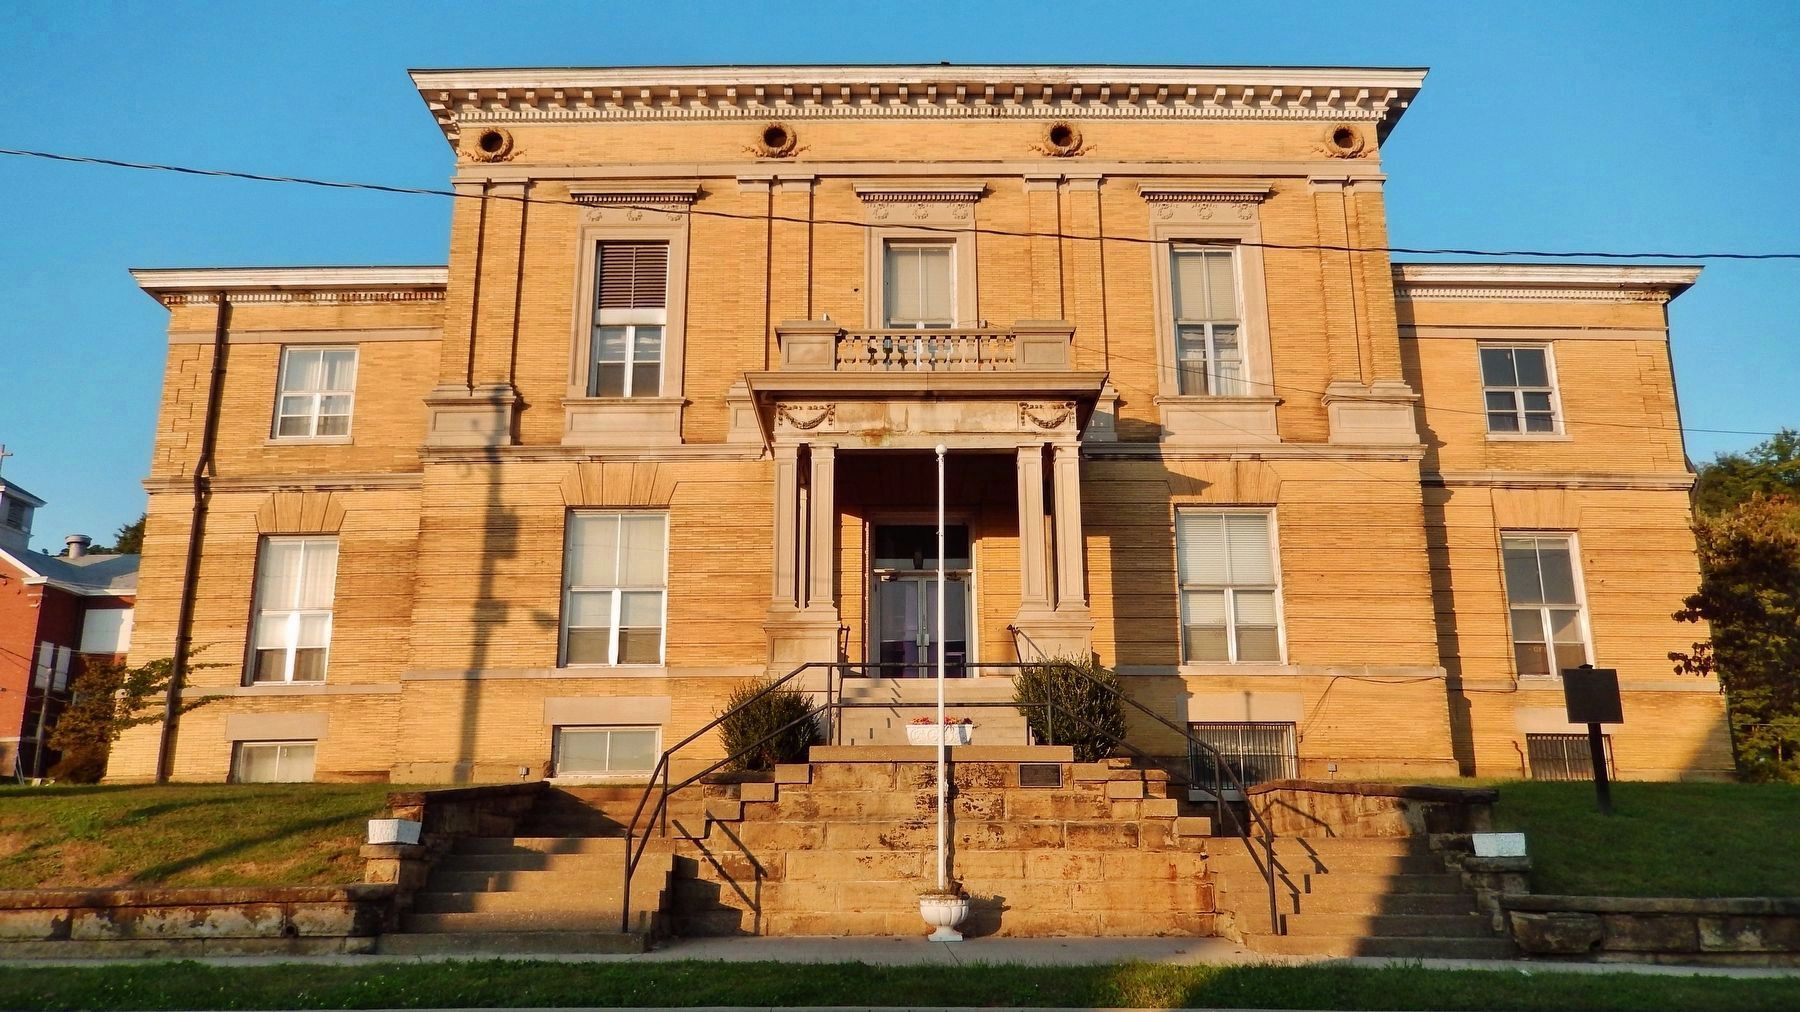 Cannelton Courthouse (1896 Perry County Courthouse) image. Click for full size.